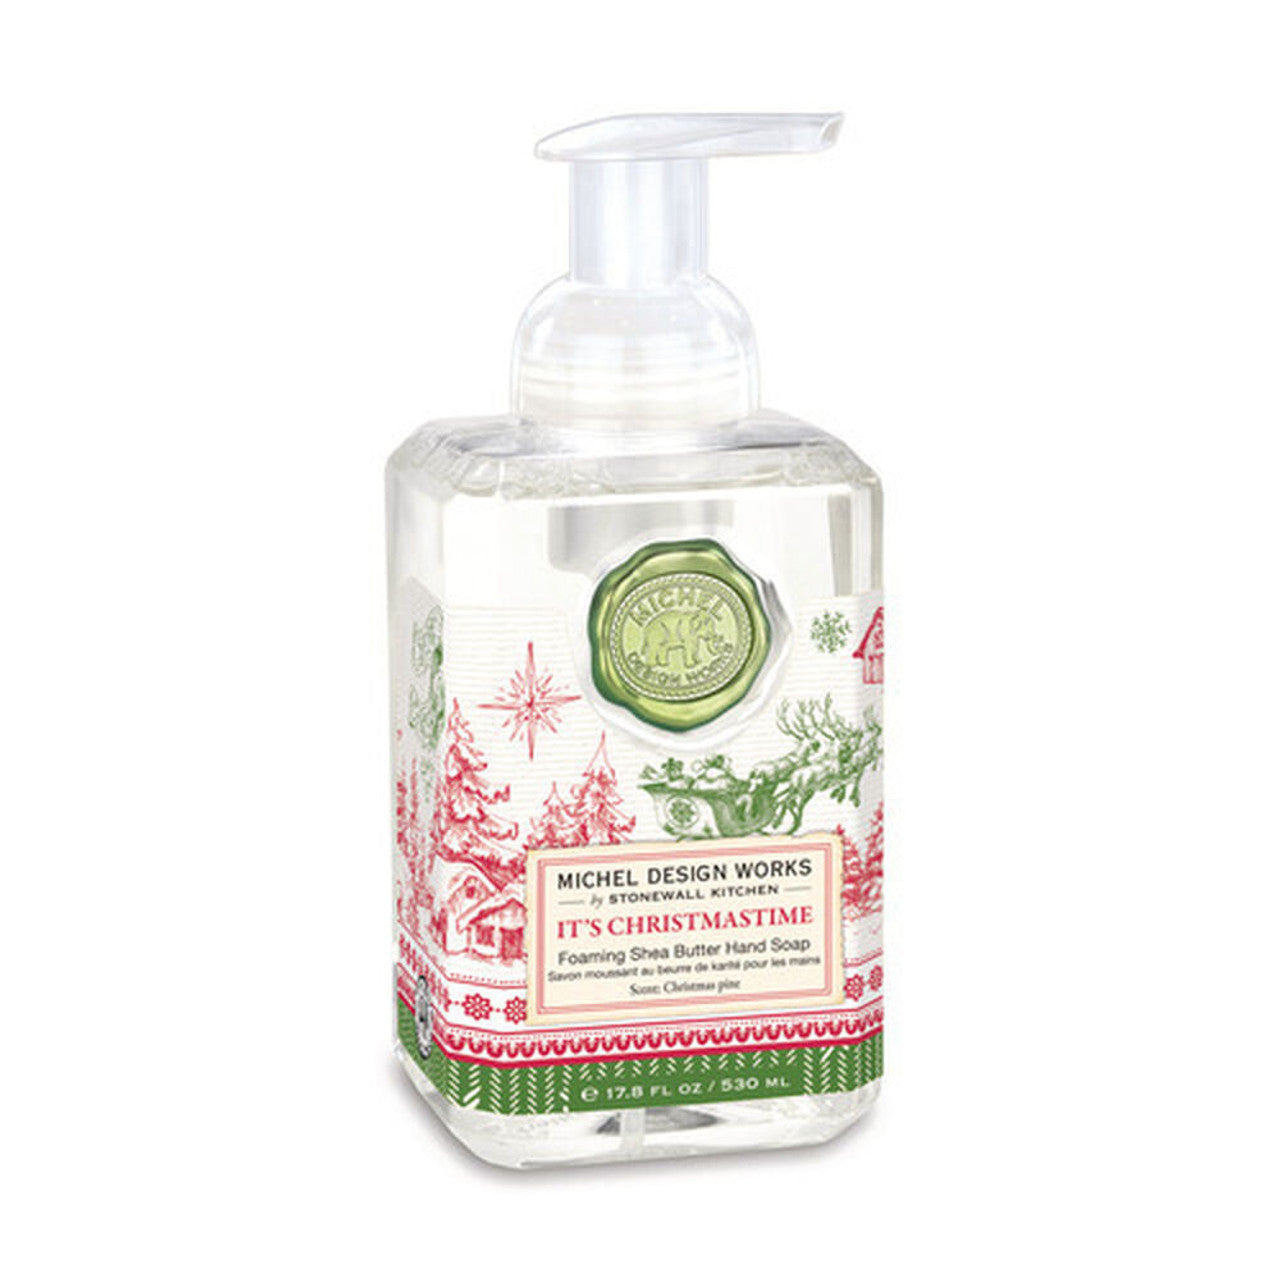 Michel Design Works It’s Christmastime Foaming Hand Soap